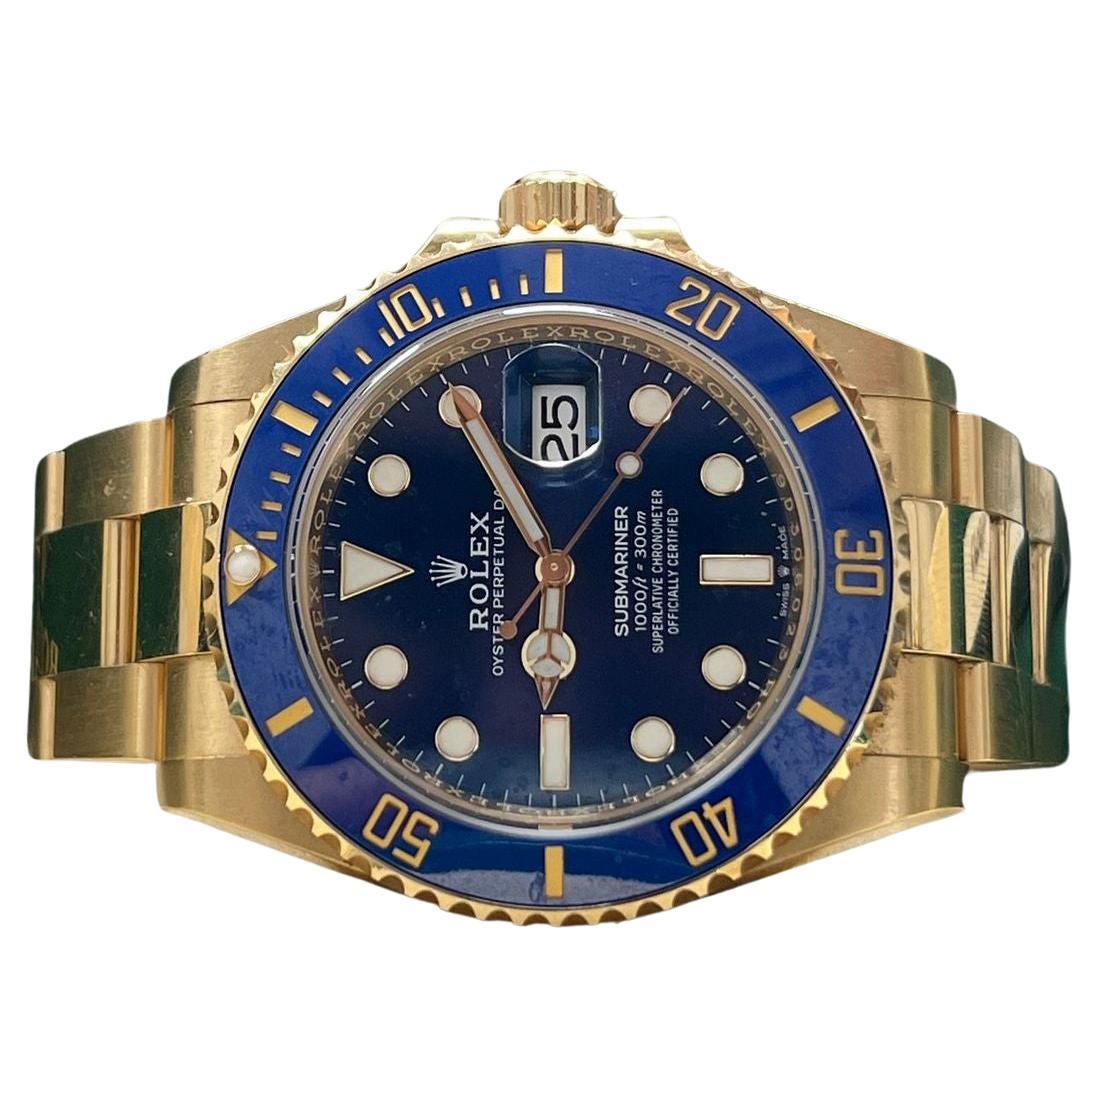 Rolex Gold Submariner 126618LB Blue 18 Carats Yellow Gold Watch In Excellent Condition For Sale In Rome, IT